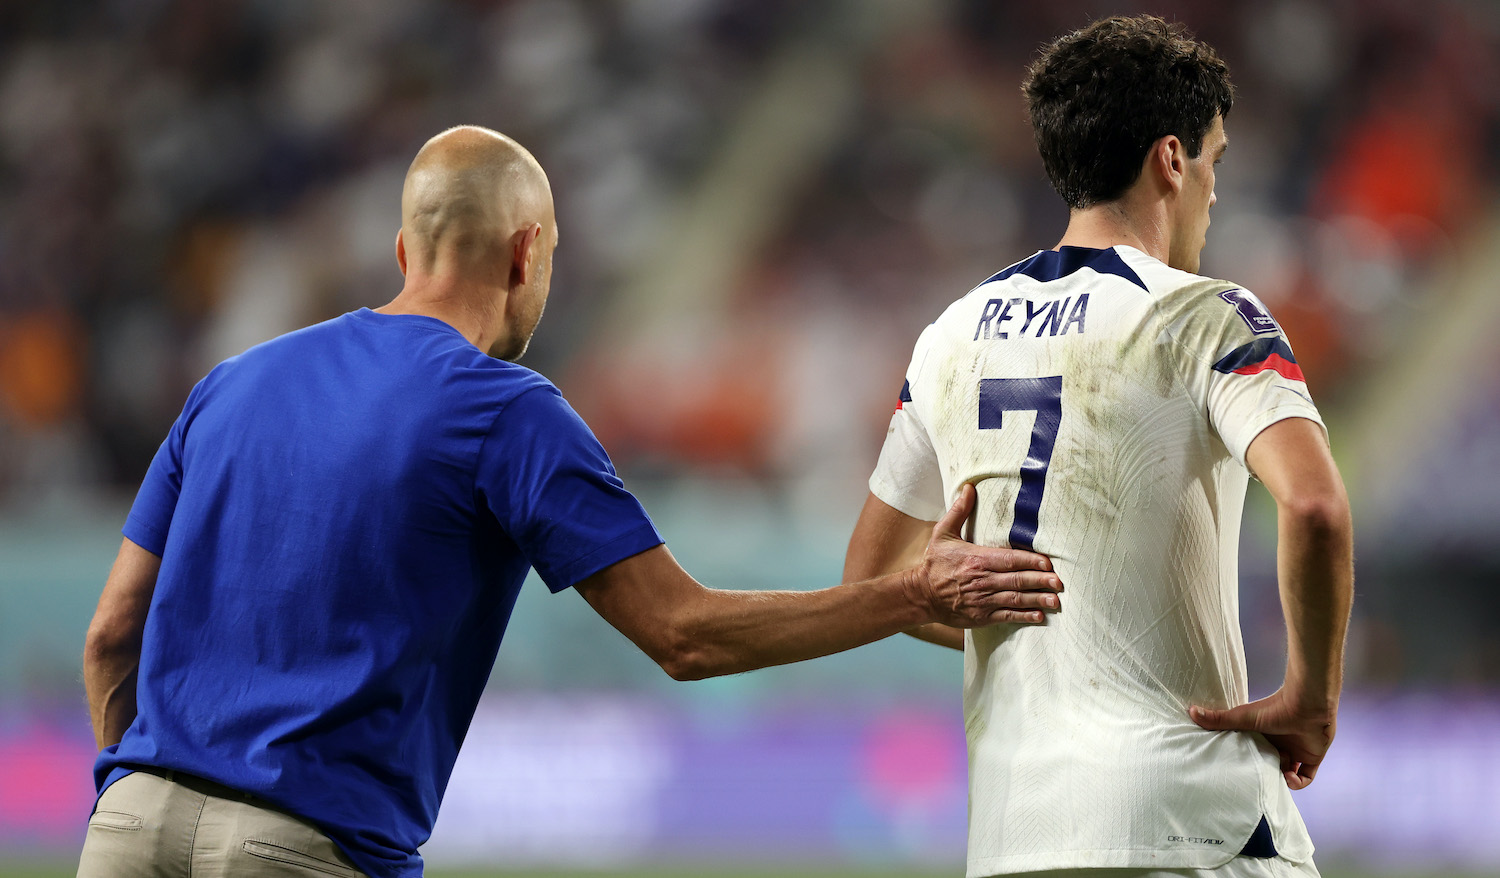 Gregg Berhalter, Head Coach of United States, gives instruction to Giovanni Reyna during the FIFA World Cup Qatar 2022 Round of 16 match between Netherlands and USA at Khalifa International Stadium on December 03, 2022 in Doha, Qatar. (Photo by Patrick Smith - FIFA/FIFA via Getty Images)